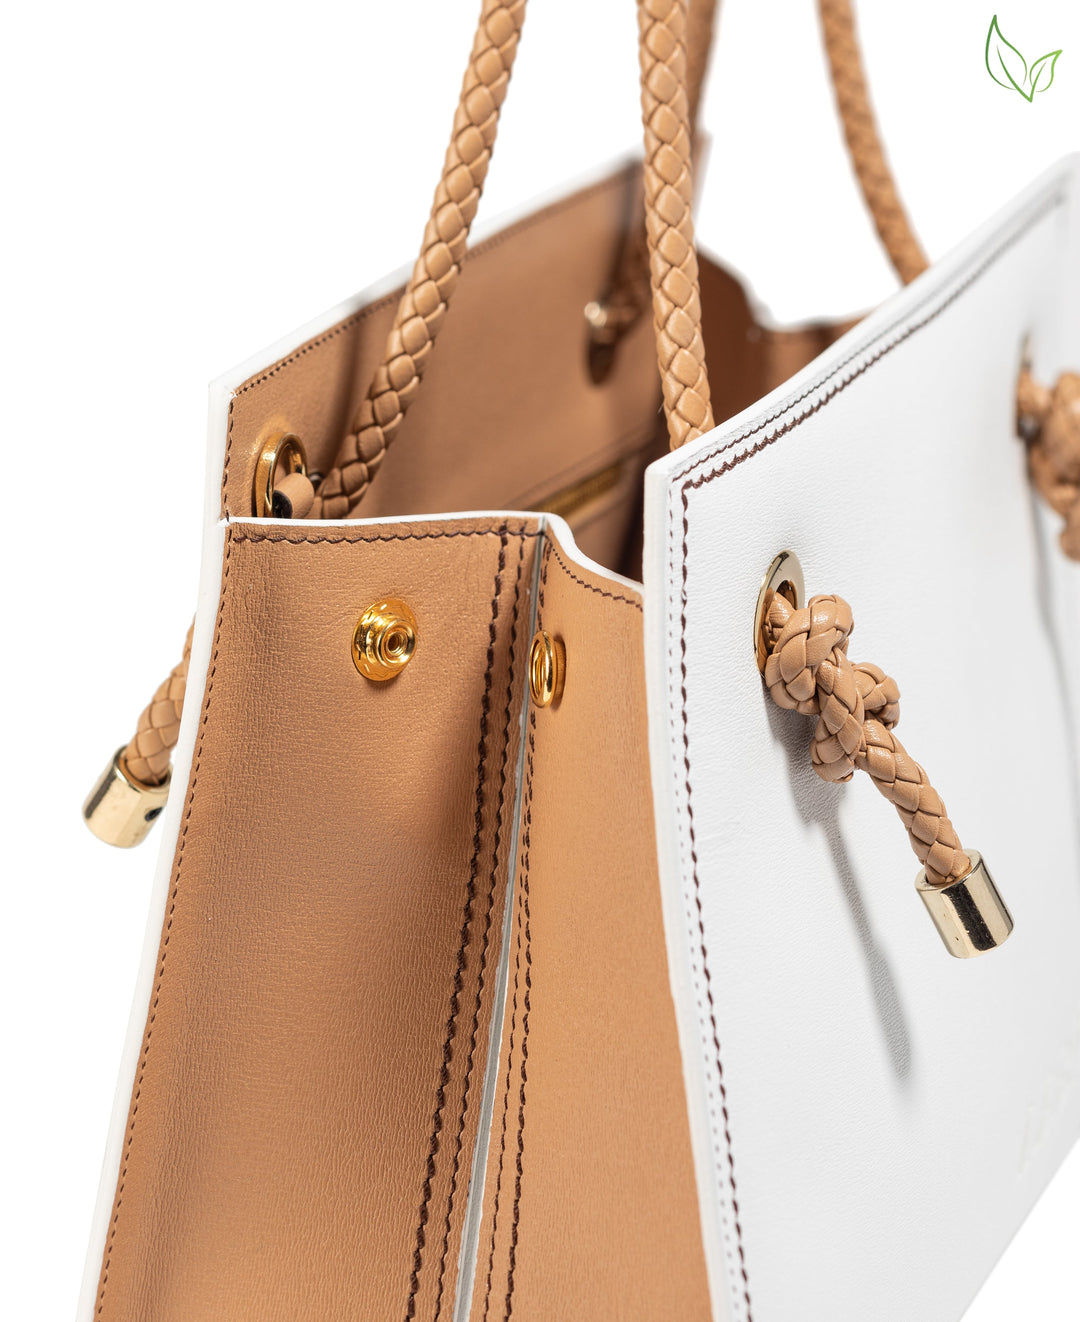 Elegant tan and white leather handbag with braided handles and gold accents